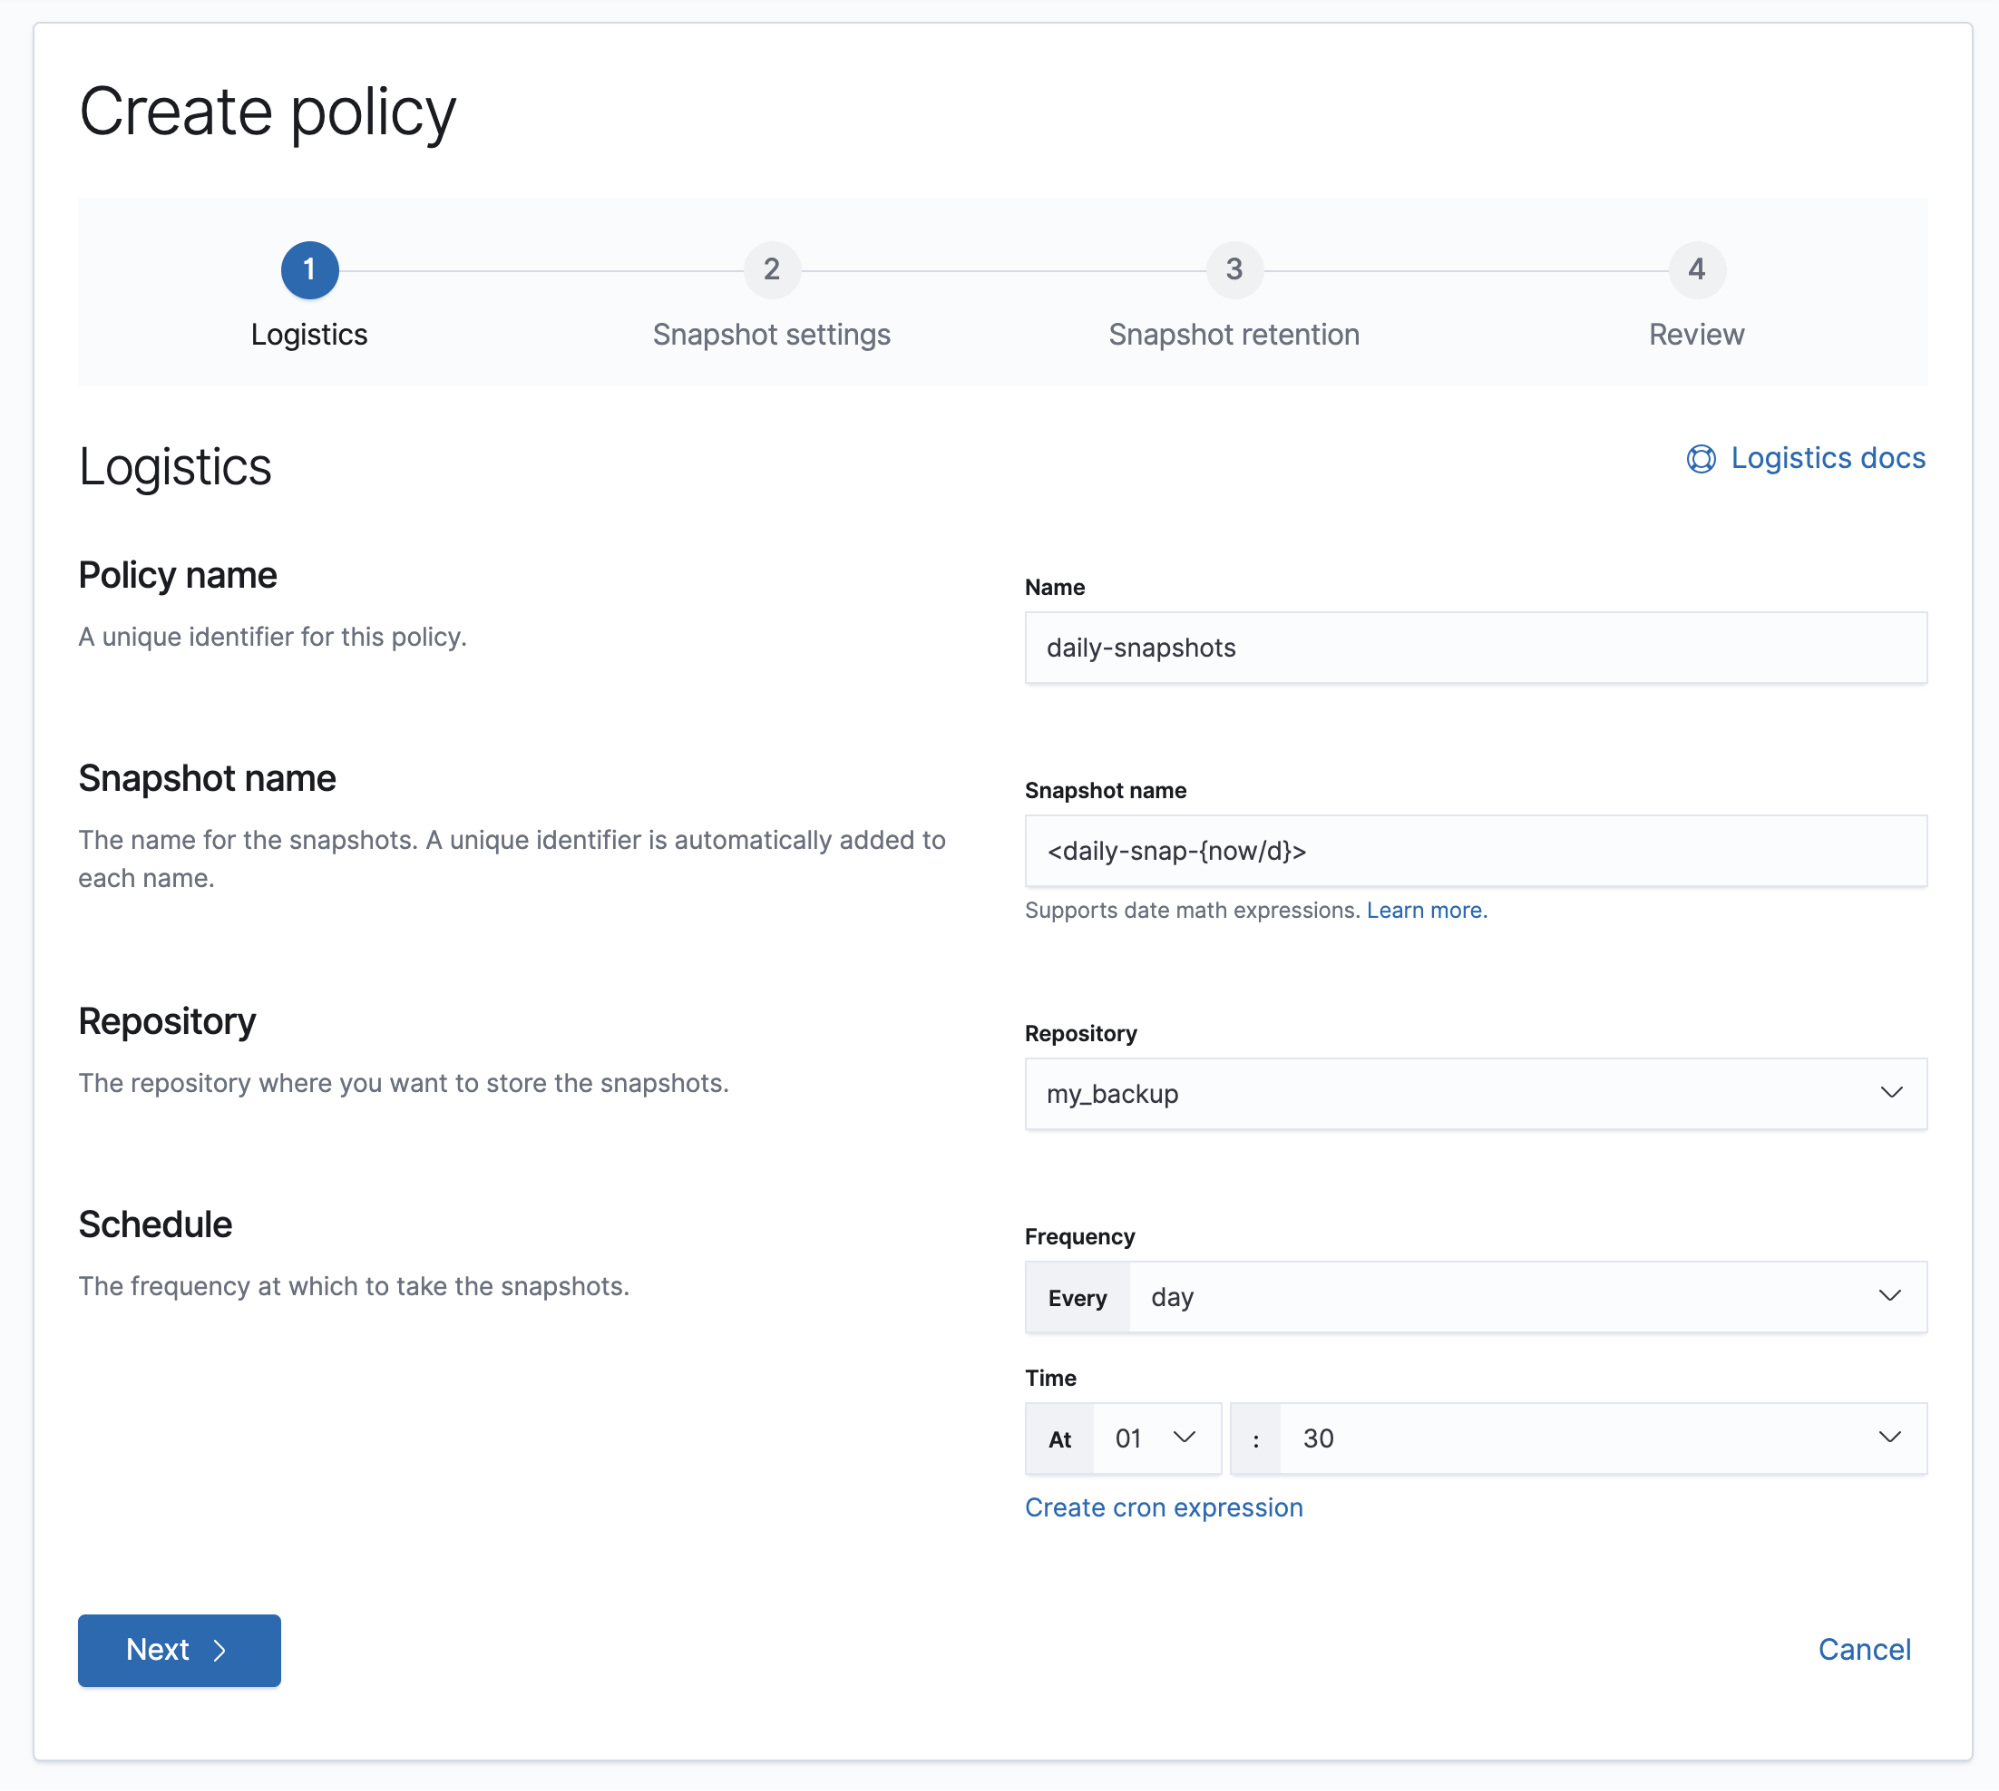 Create policy wizard